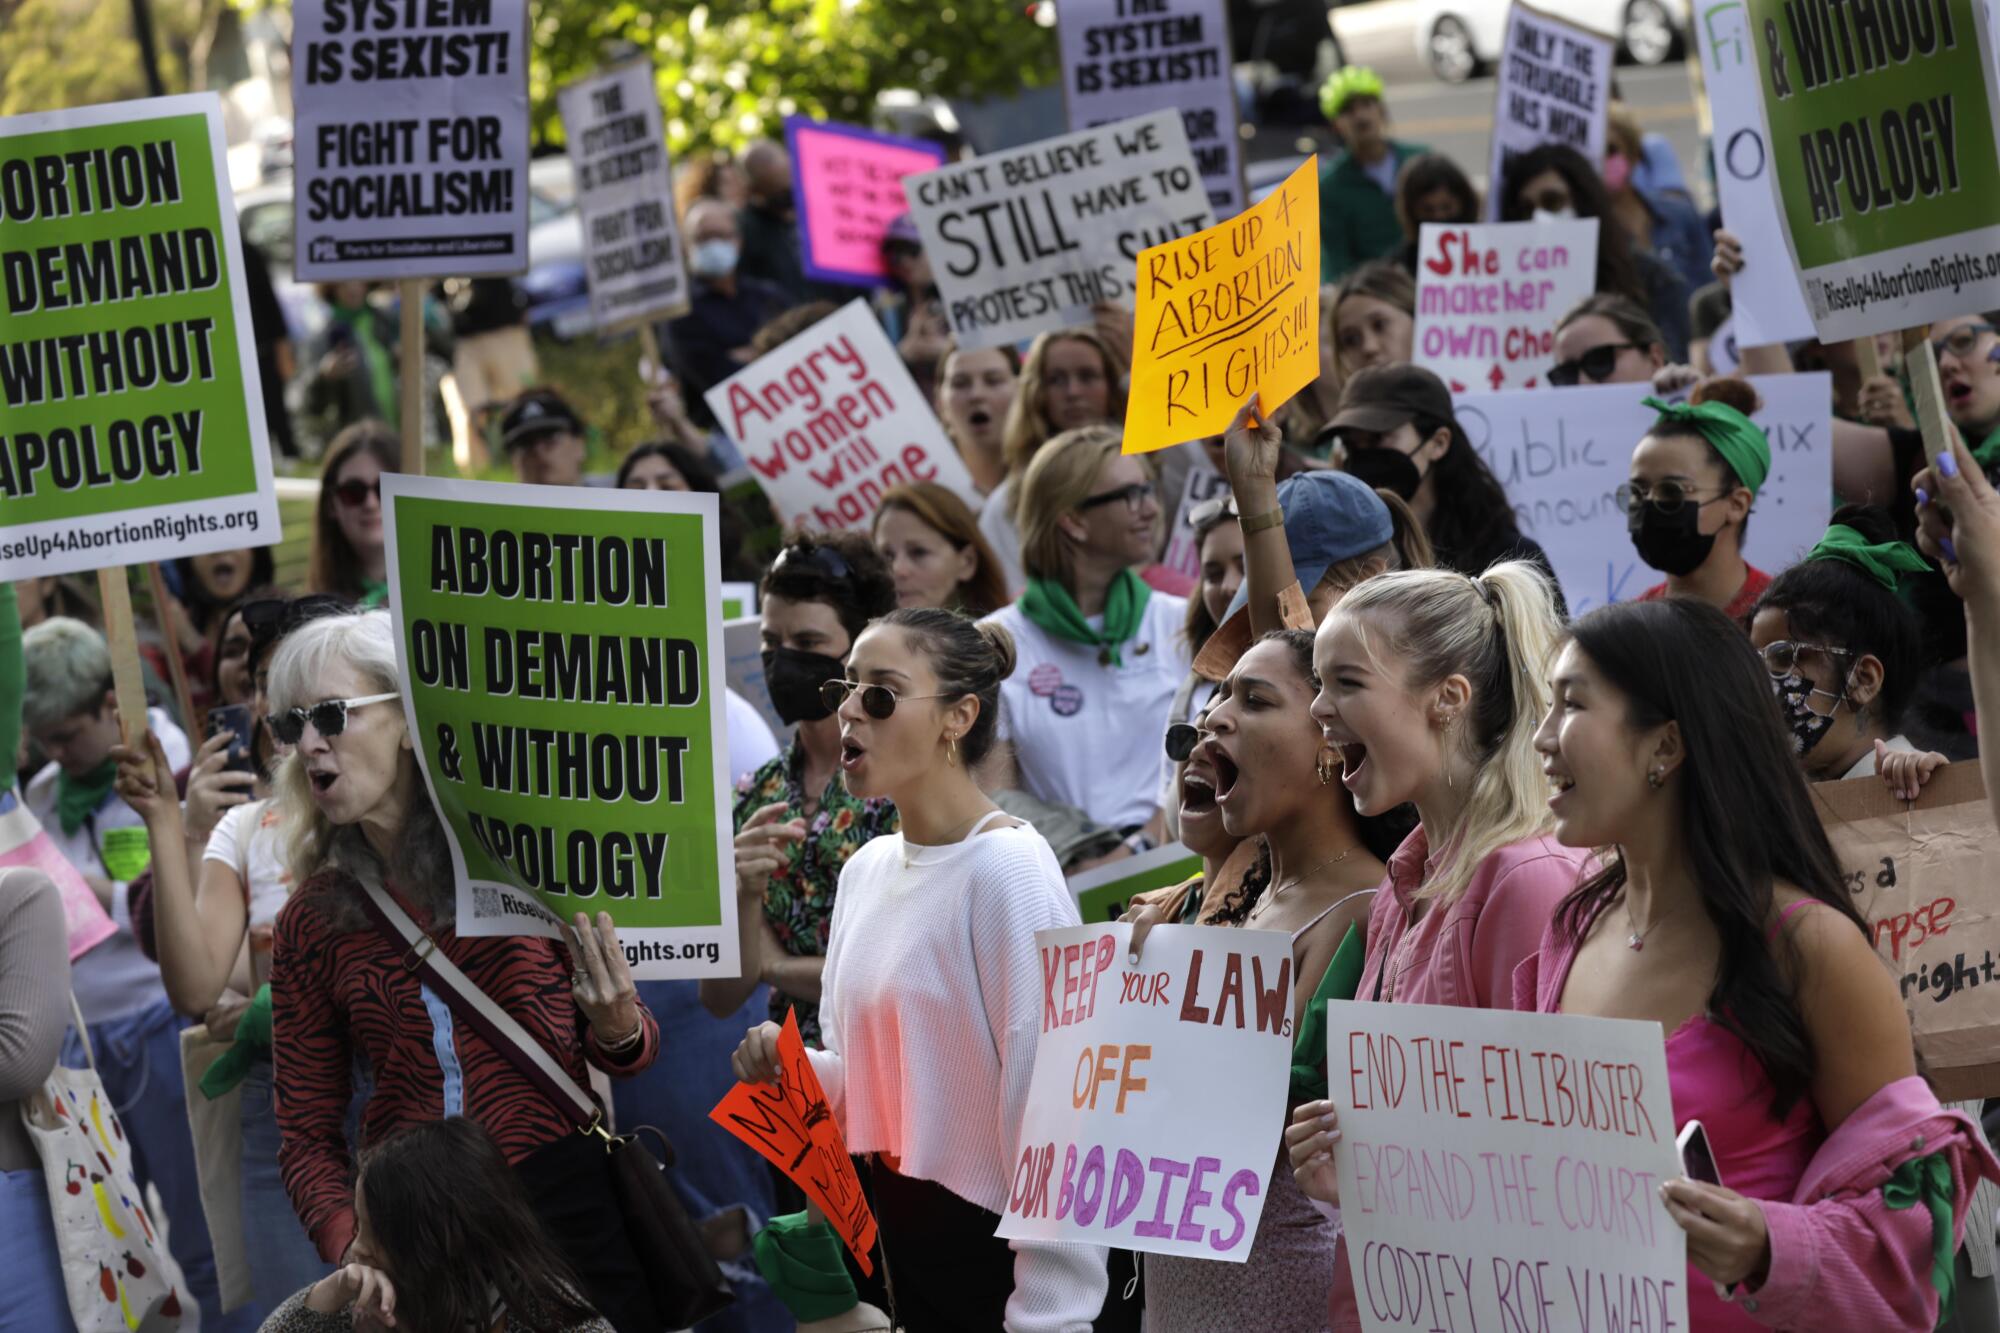 Protesters with signs in support of abortion rights